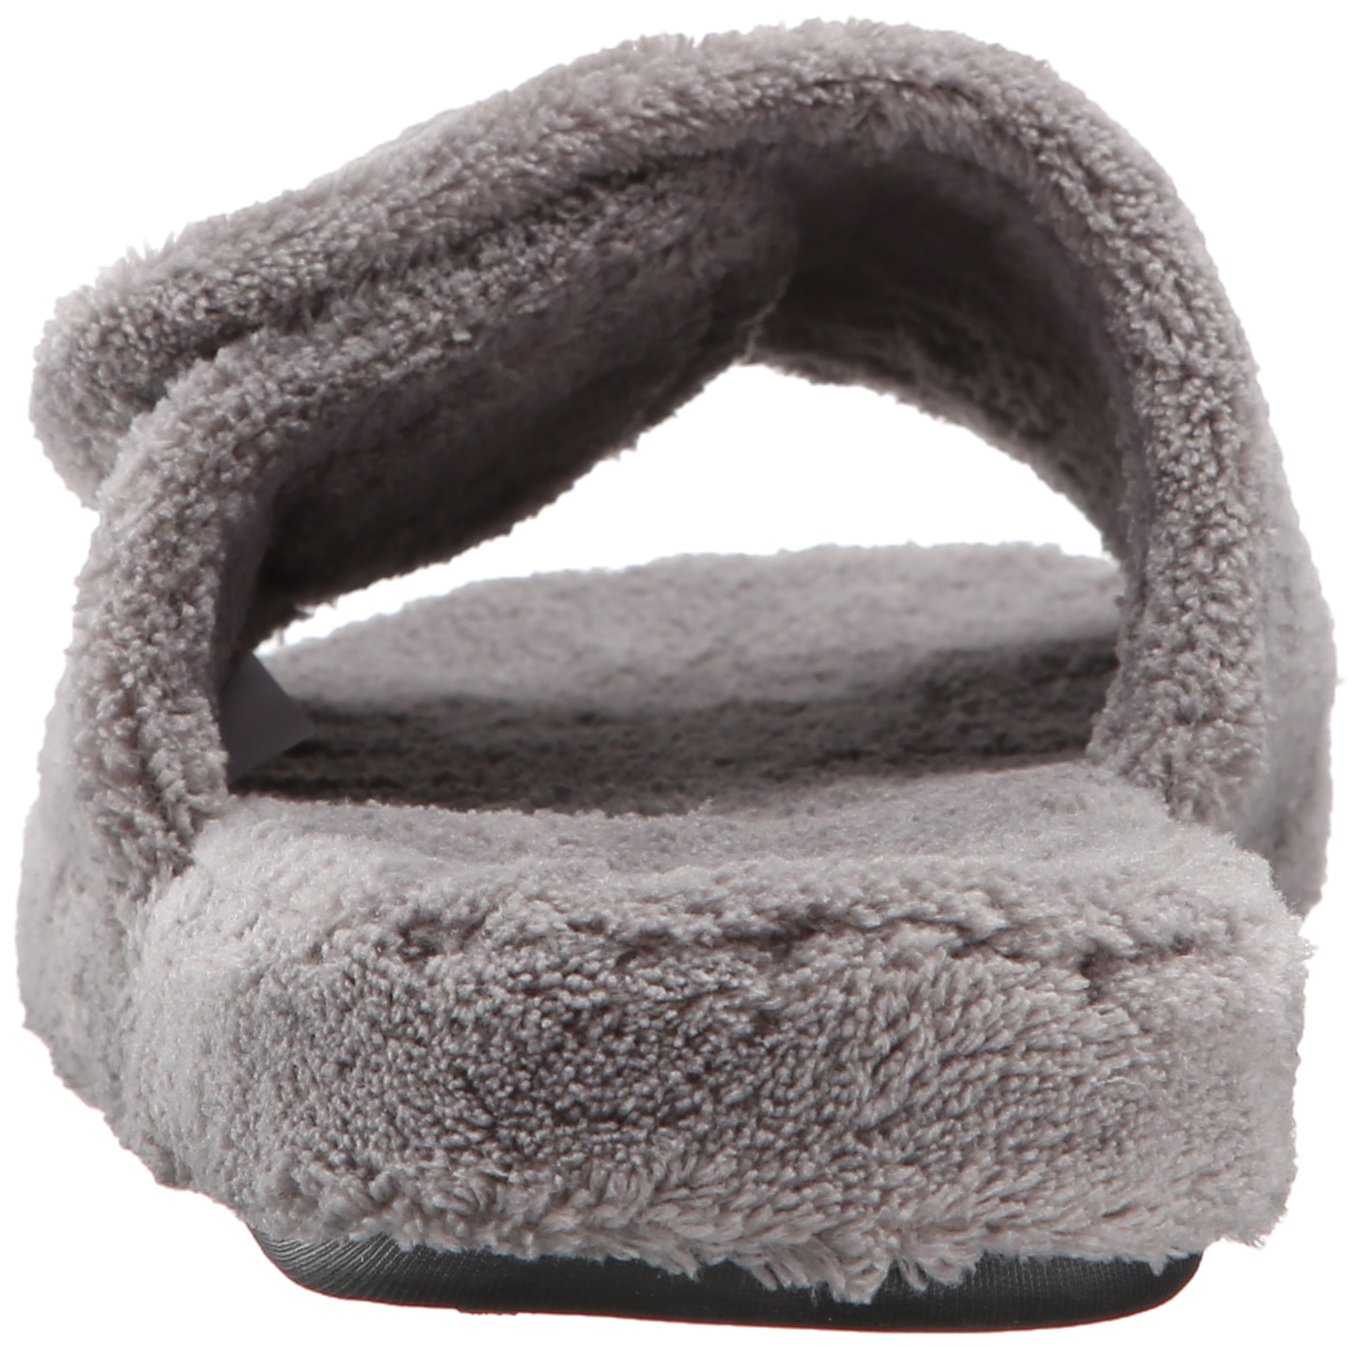 Acorn Men's Spa Slide Slippers with Adjustable Strap and Soft Terry Lining